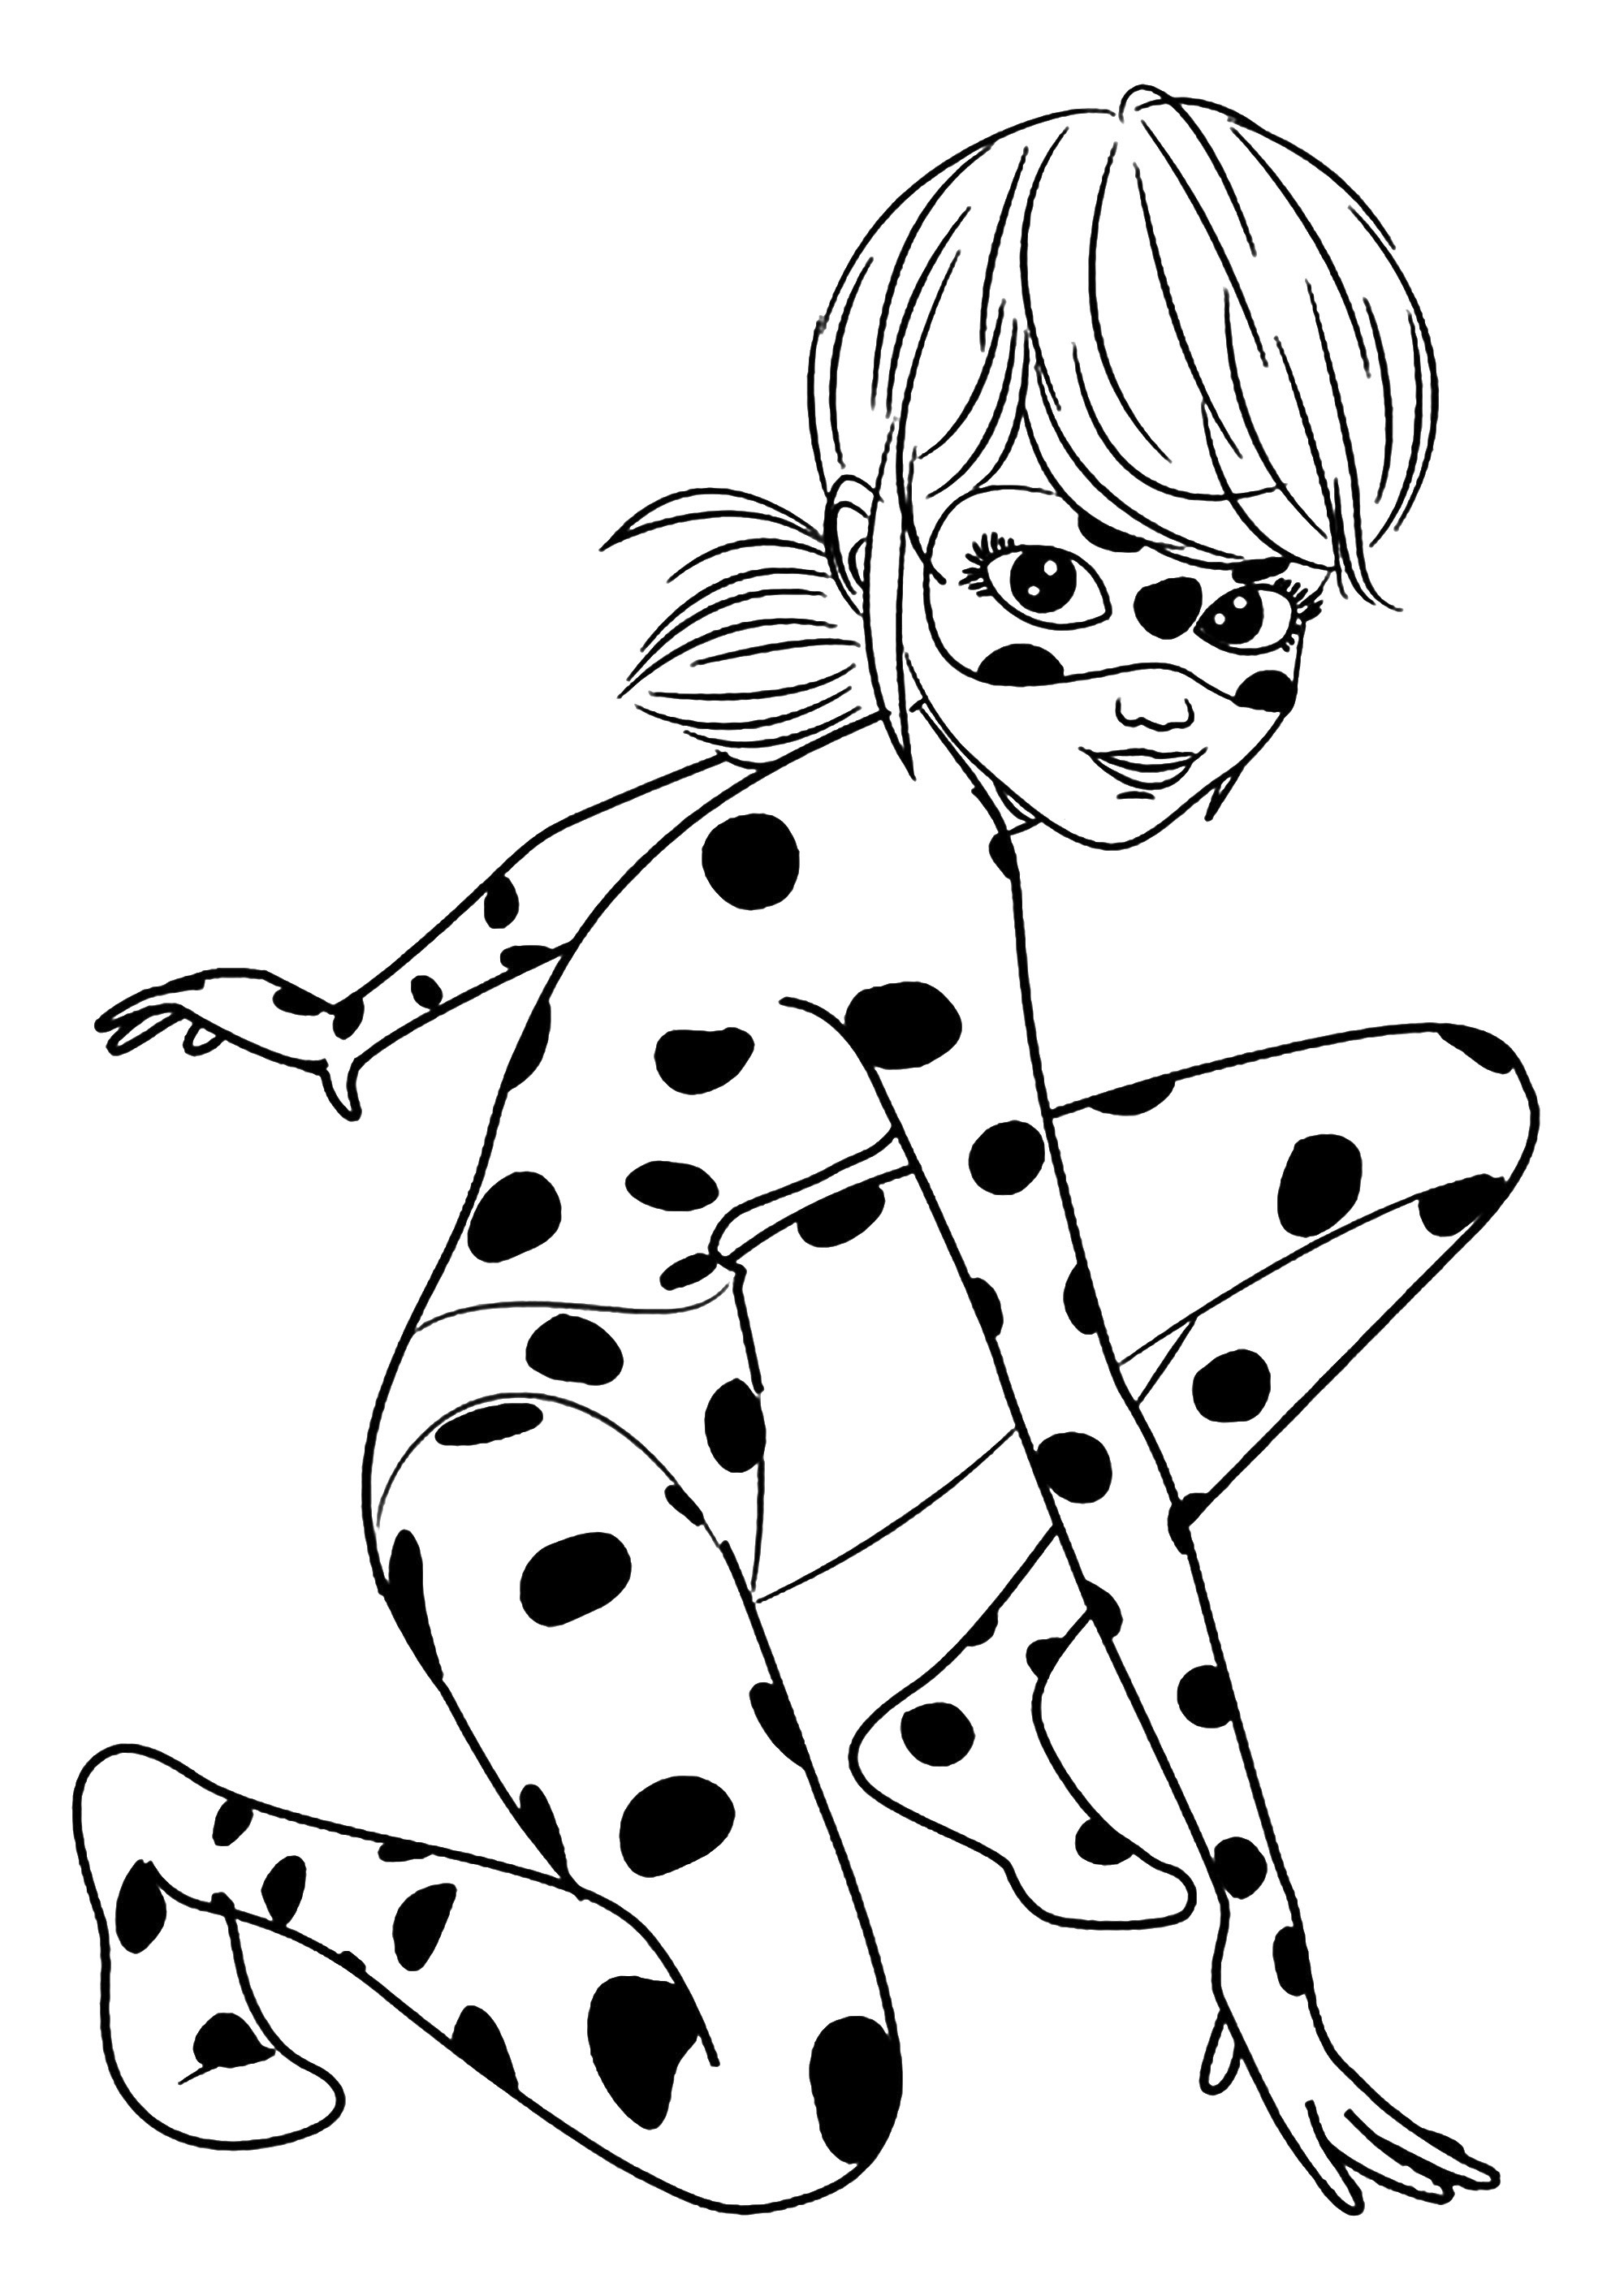 https://www.justcolor.net/kids/wp-content/uploads/sites/12/nggallery/miraculous-lady-bug/coloring-pages-for-children-miraculous-lady-bug-59418.jpg